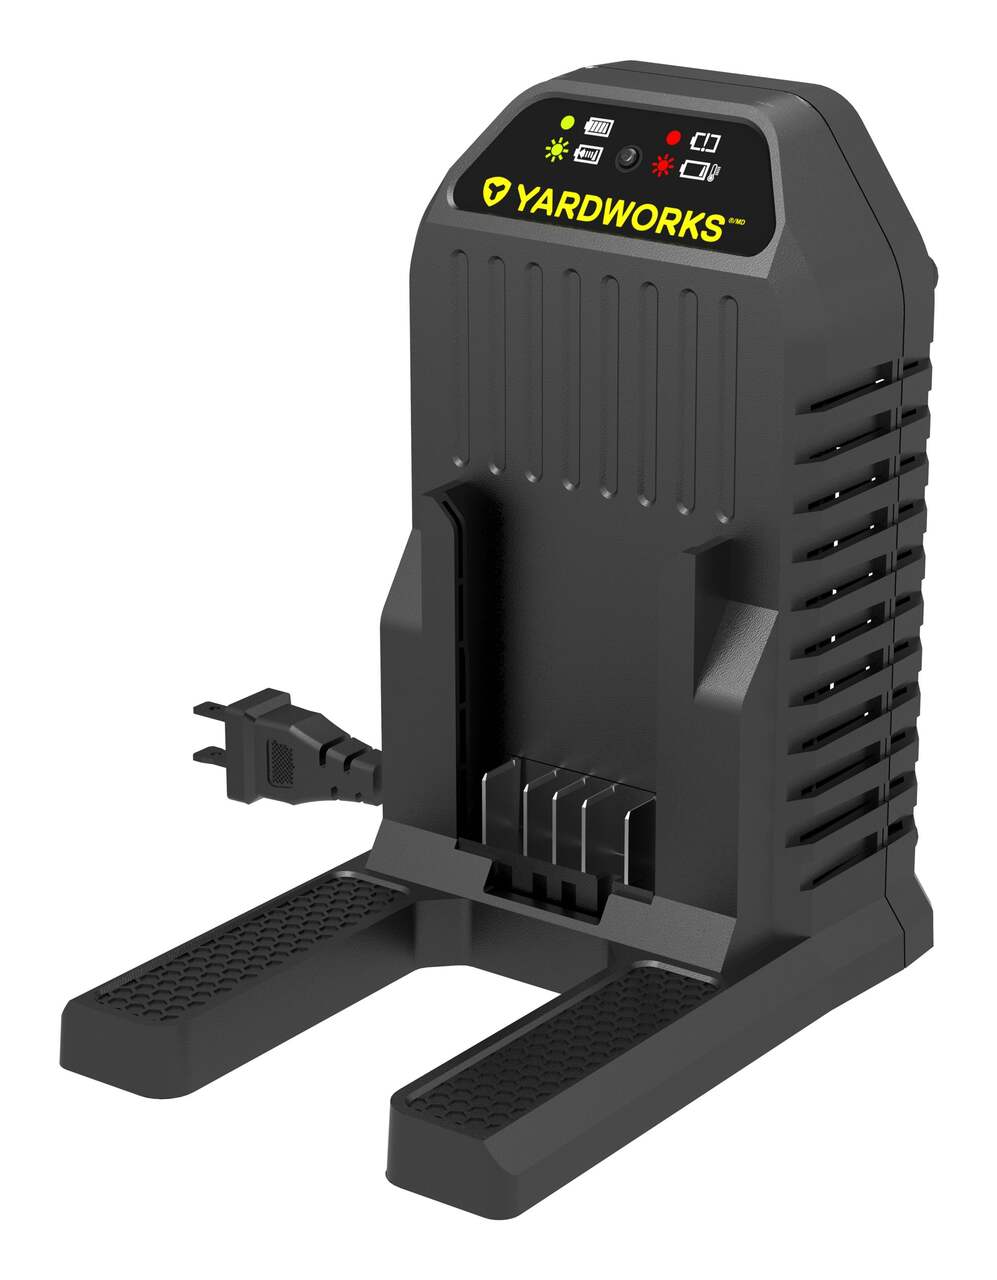 https://media-www.canadiantire.ca/product/seasonal-gardening/outdoor-tools/tractor-lawn-mower-snowthrower-parts/0601990/yardworks-48v-2a-charger-4d4814e2-08ab-4407-ae55-dfba2fe0bbc4-jpgrendition.jpg?imdensity=1&imwidth=1244&impolicy=mZoom